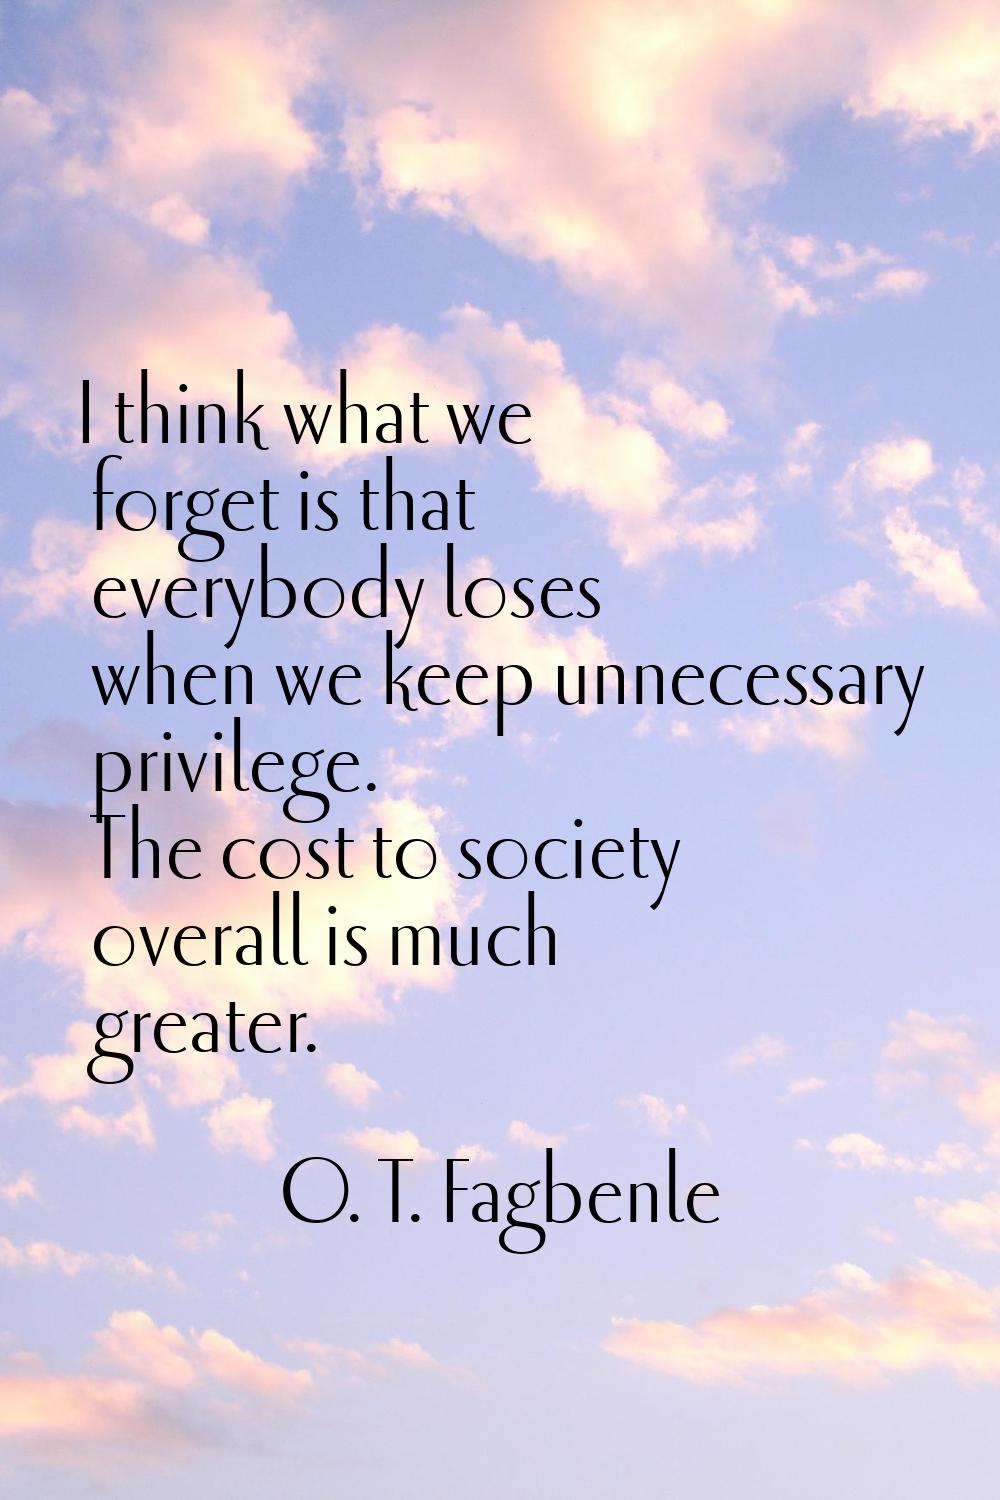 I think what we forget is that everybody loses when we keep unnecessary privilege. The cost to soci